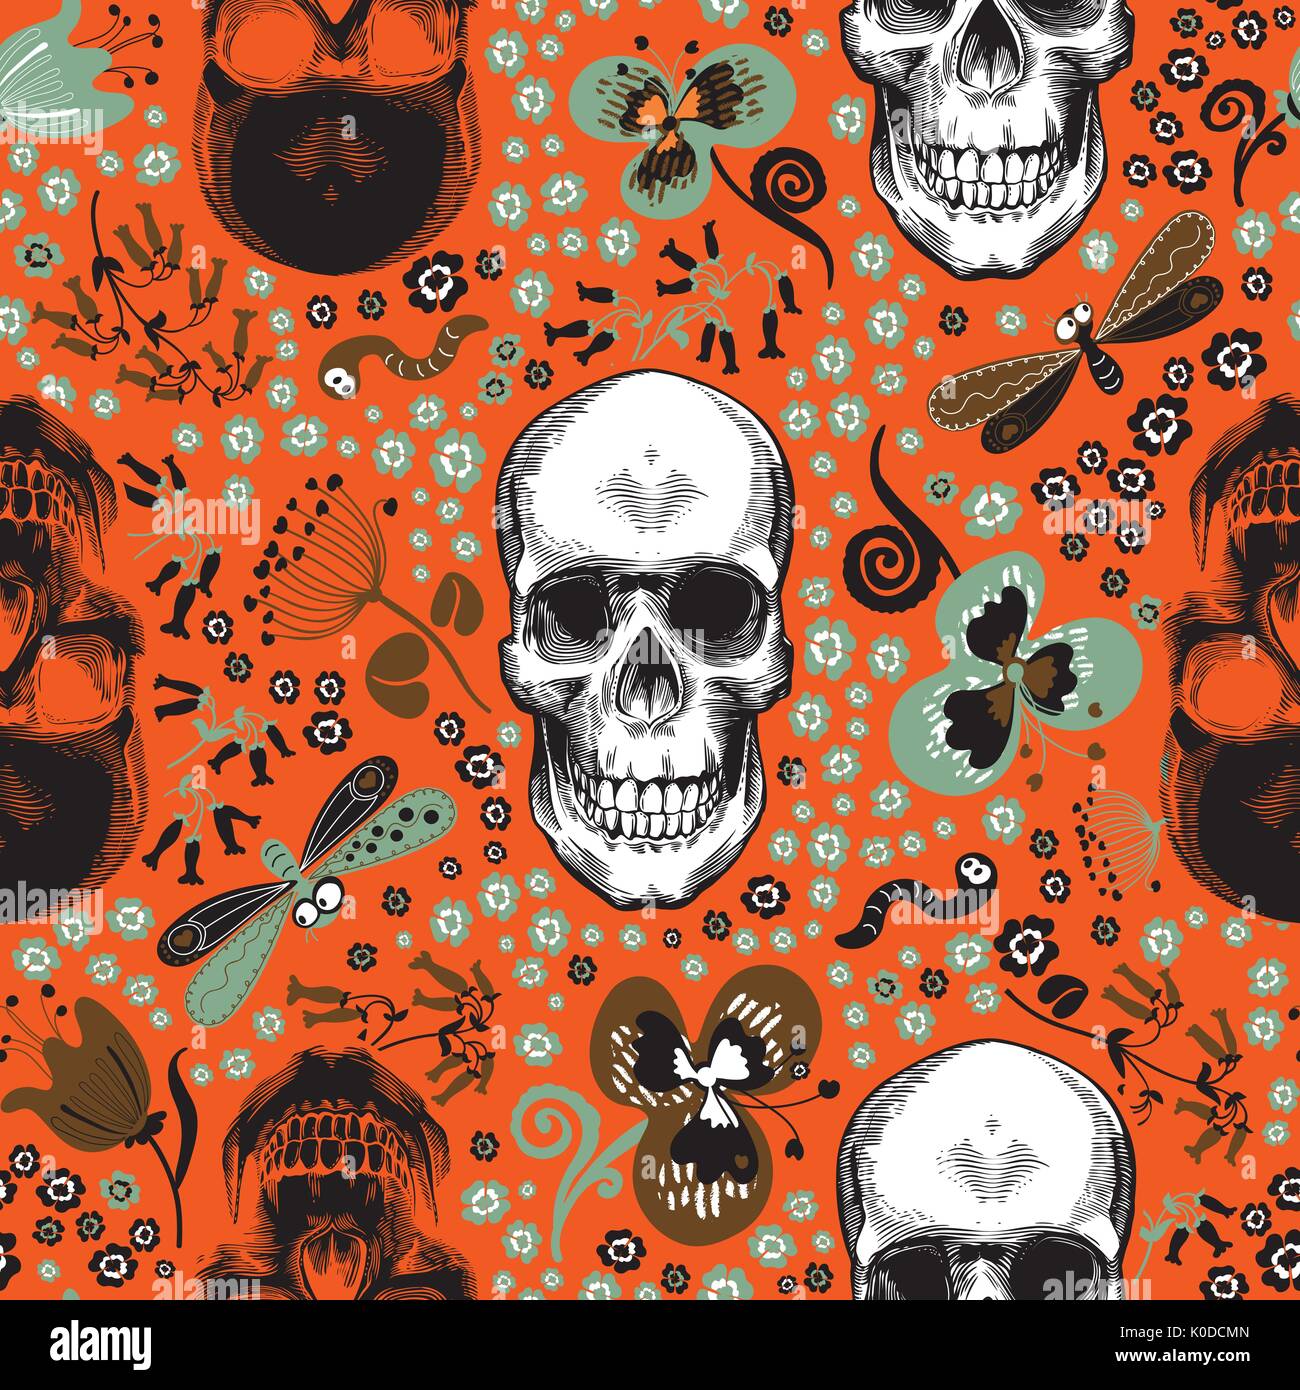 Cute seamless pattern with human skulls drawn in vintage engraving style, cartoon green and brown flowers, butterflies and worms against orange background. Vector illustration for textile print. Stock Vector